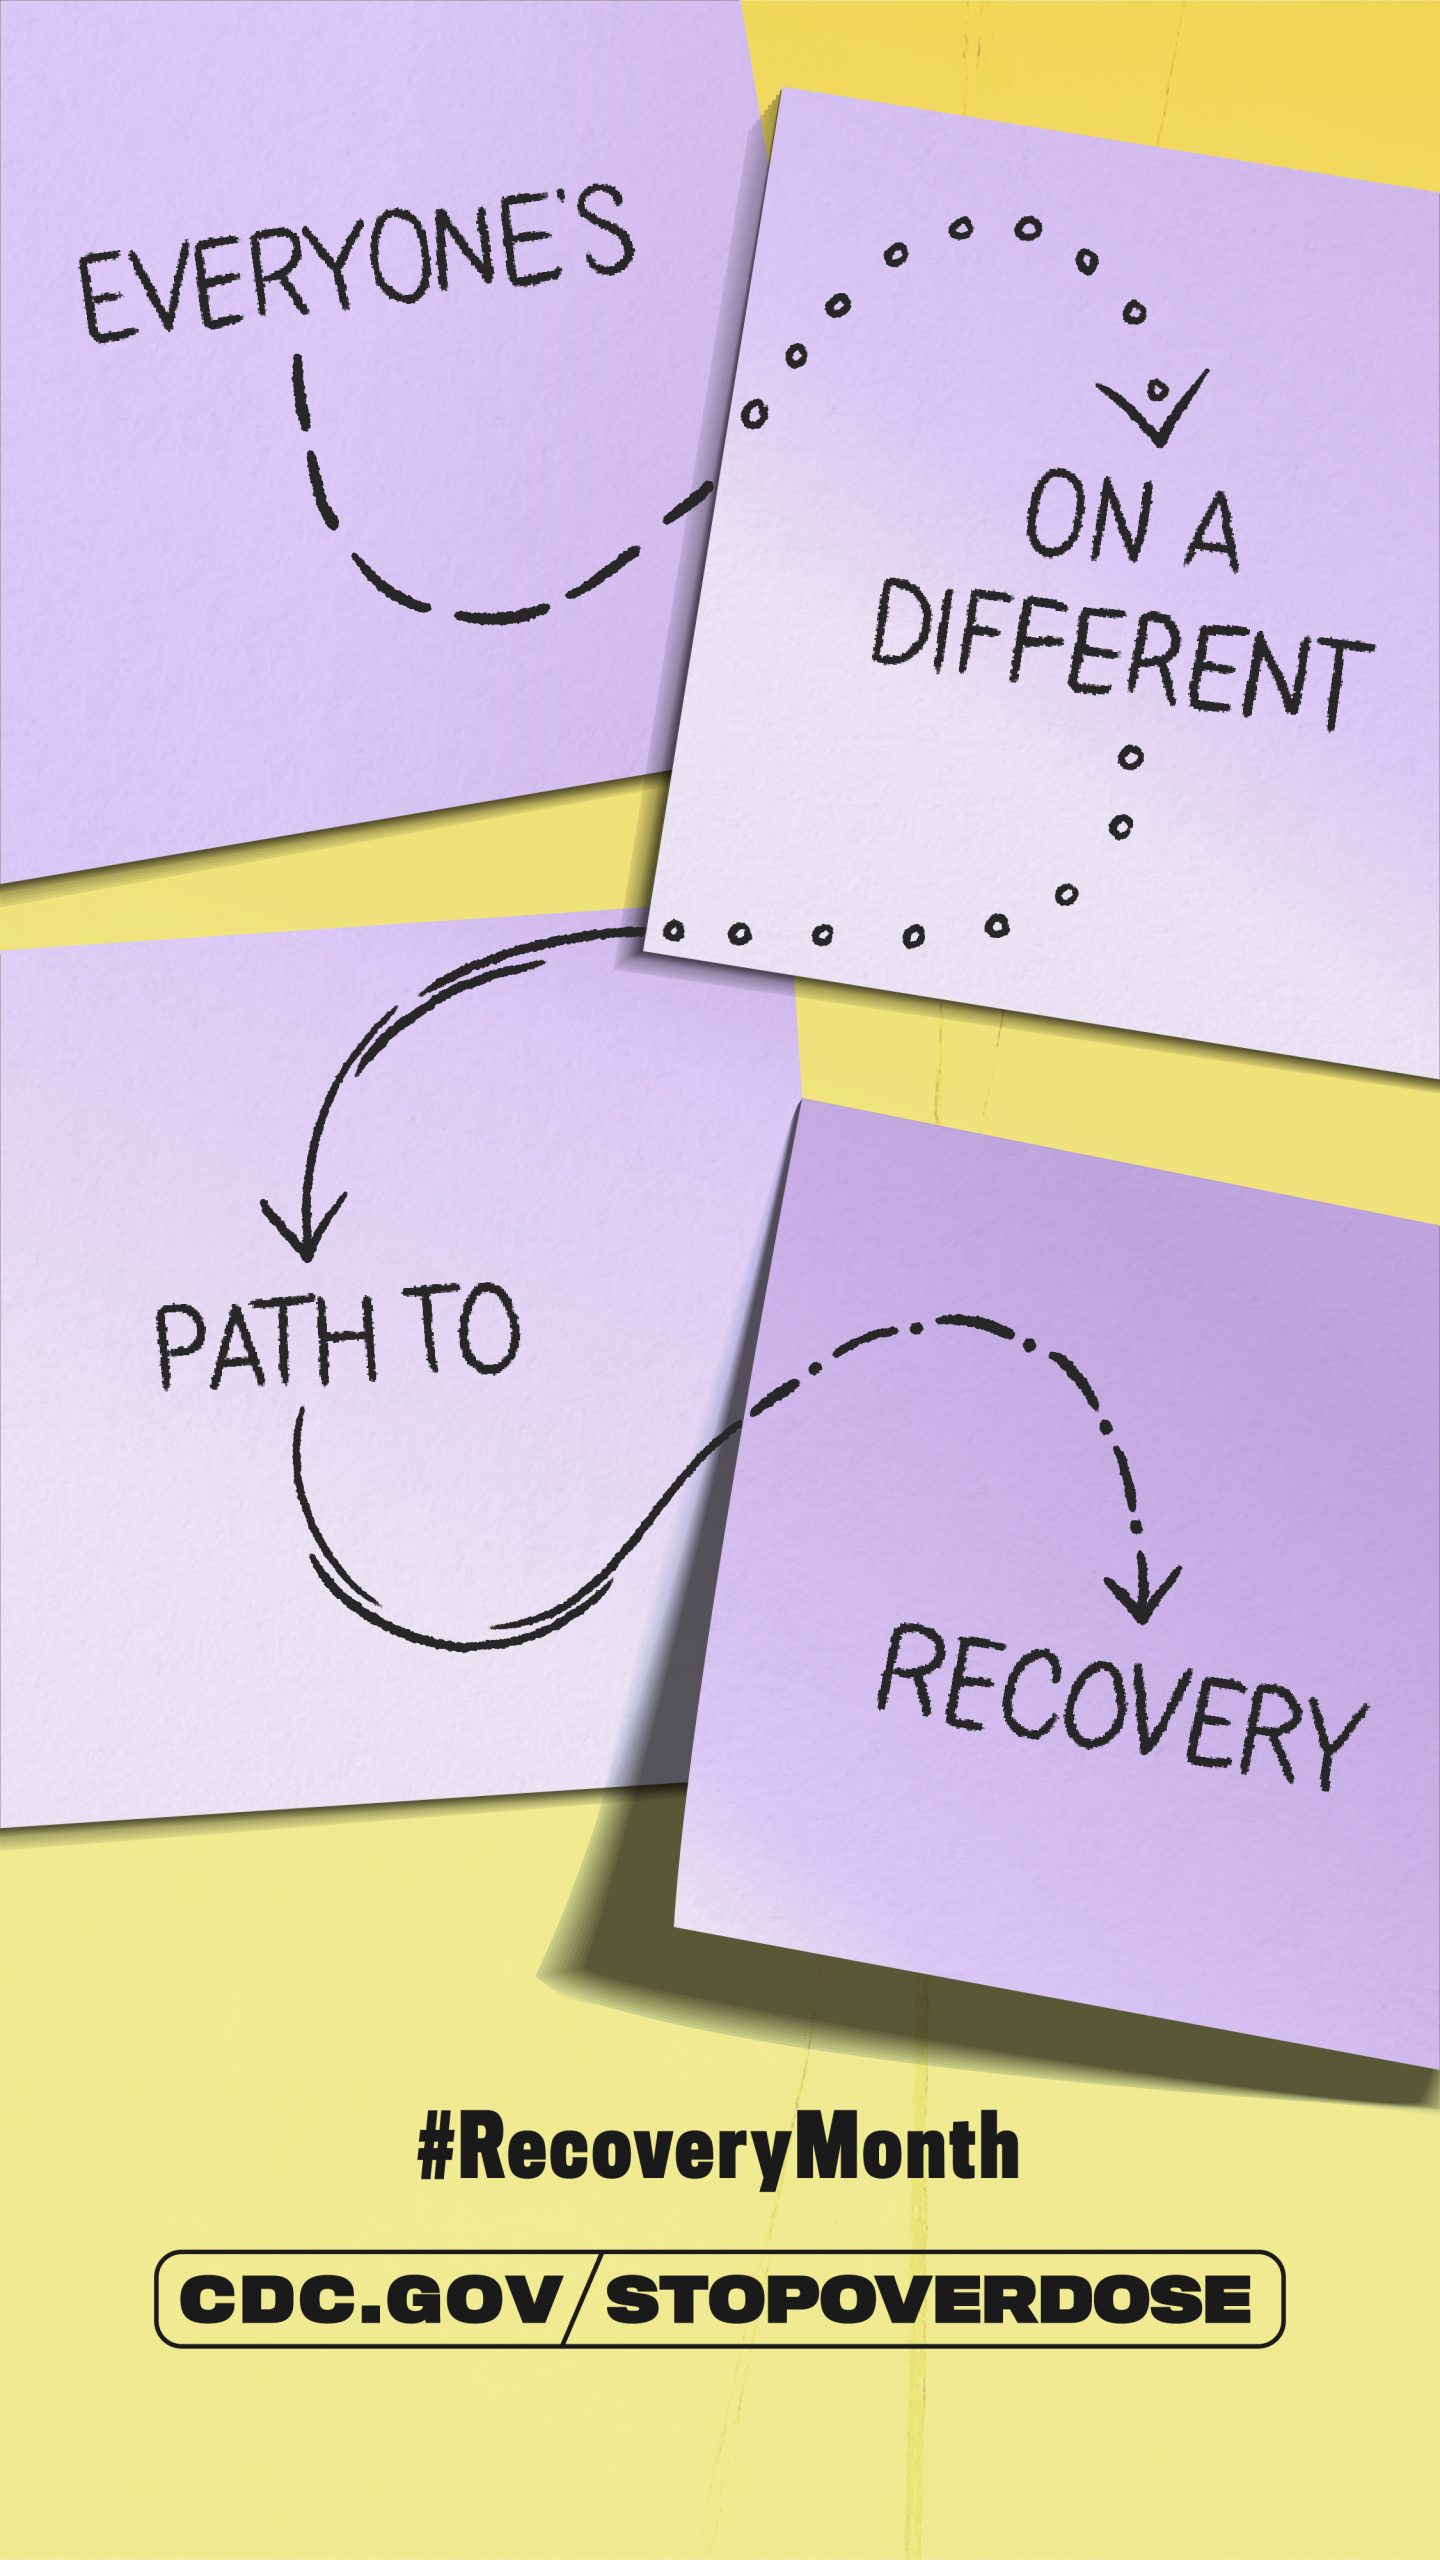 Everyone's on a different path to recovery.